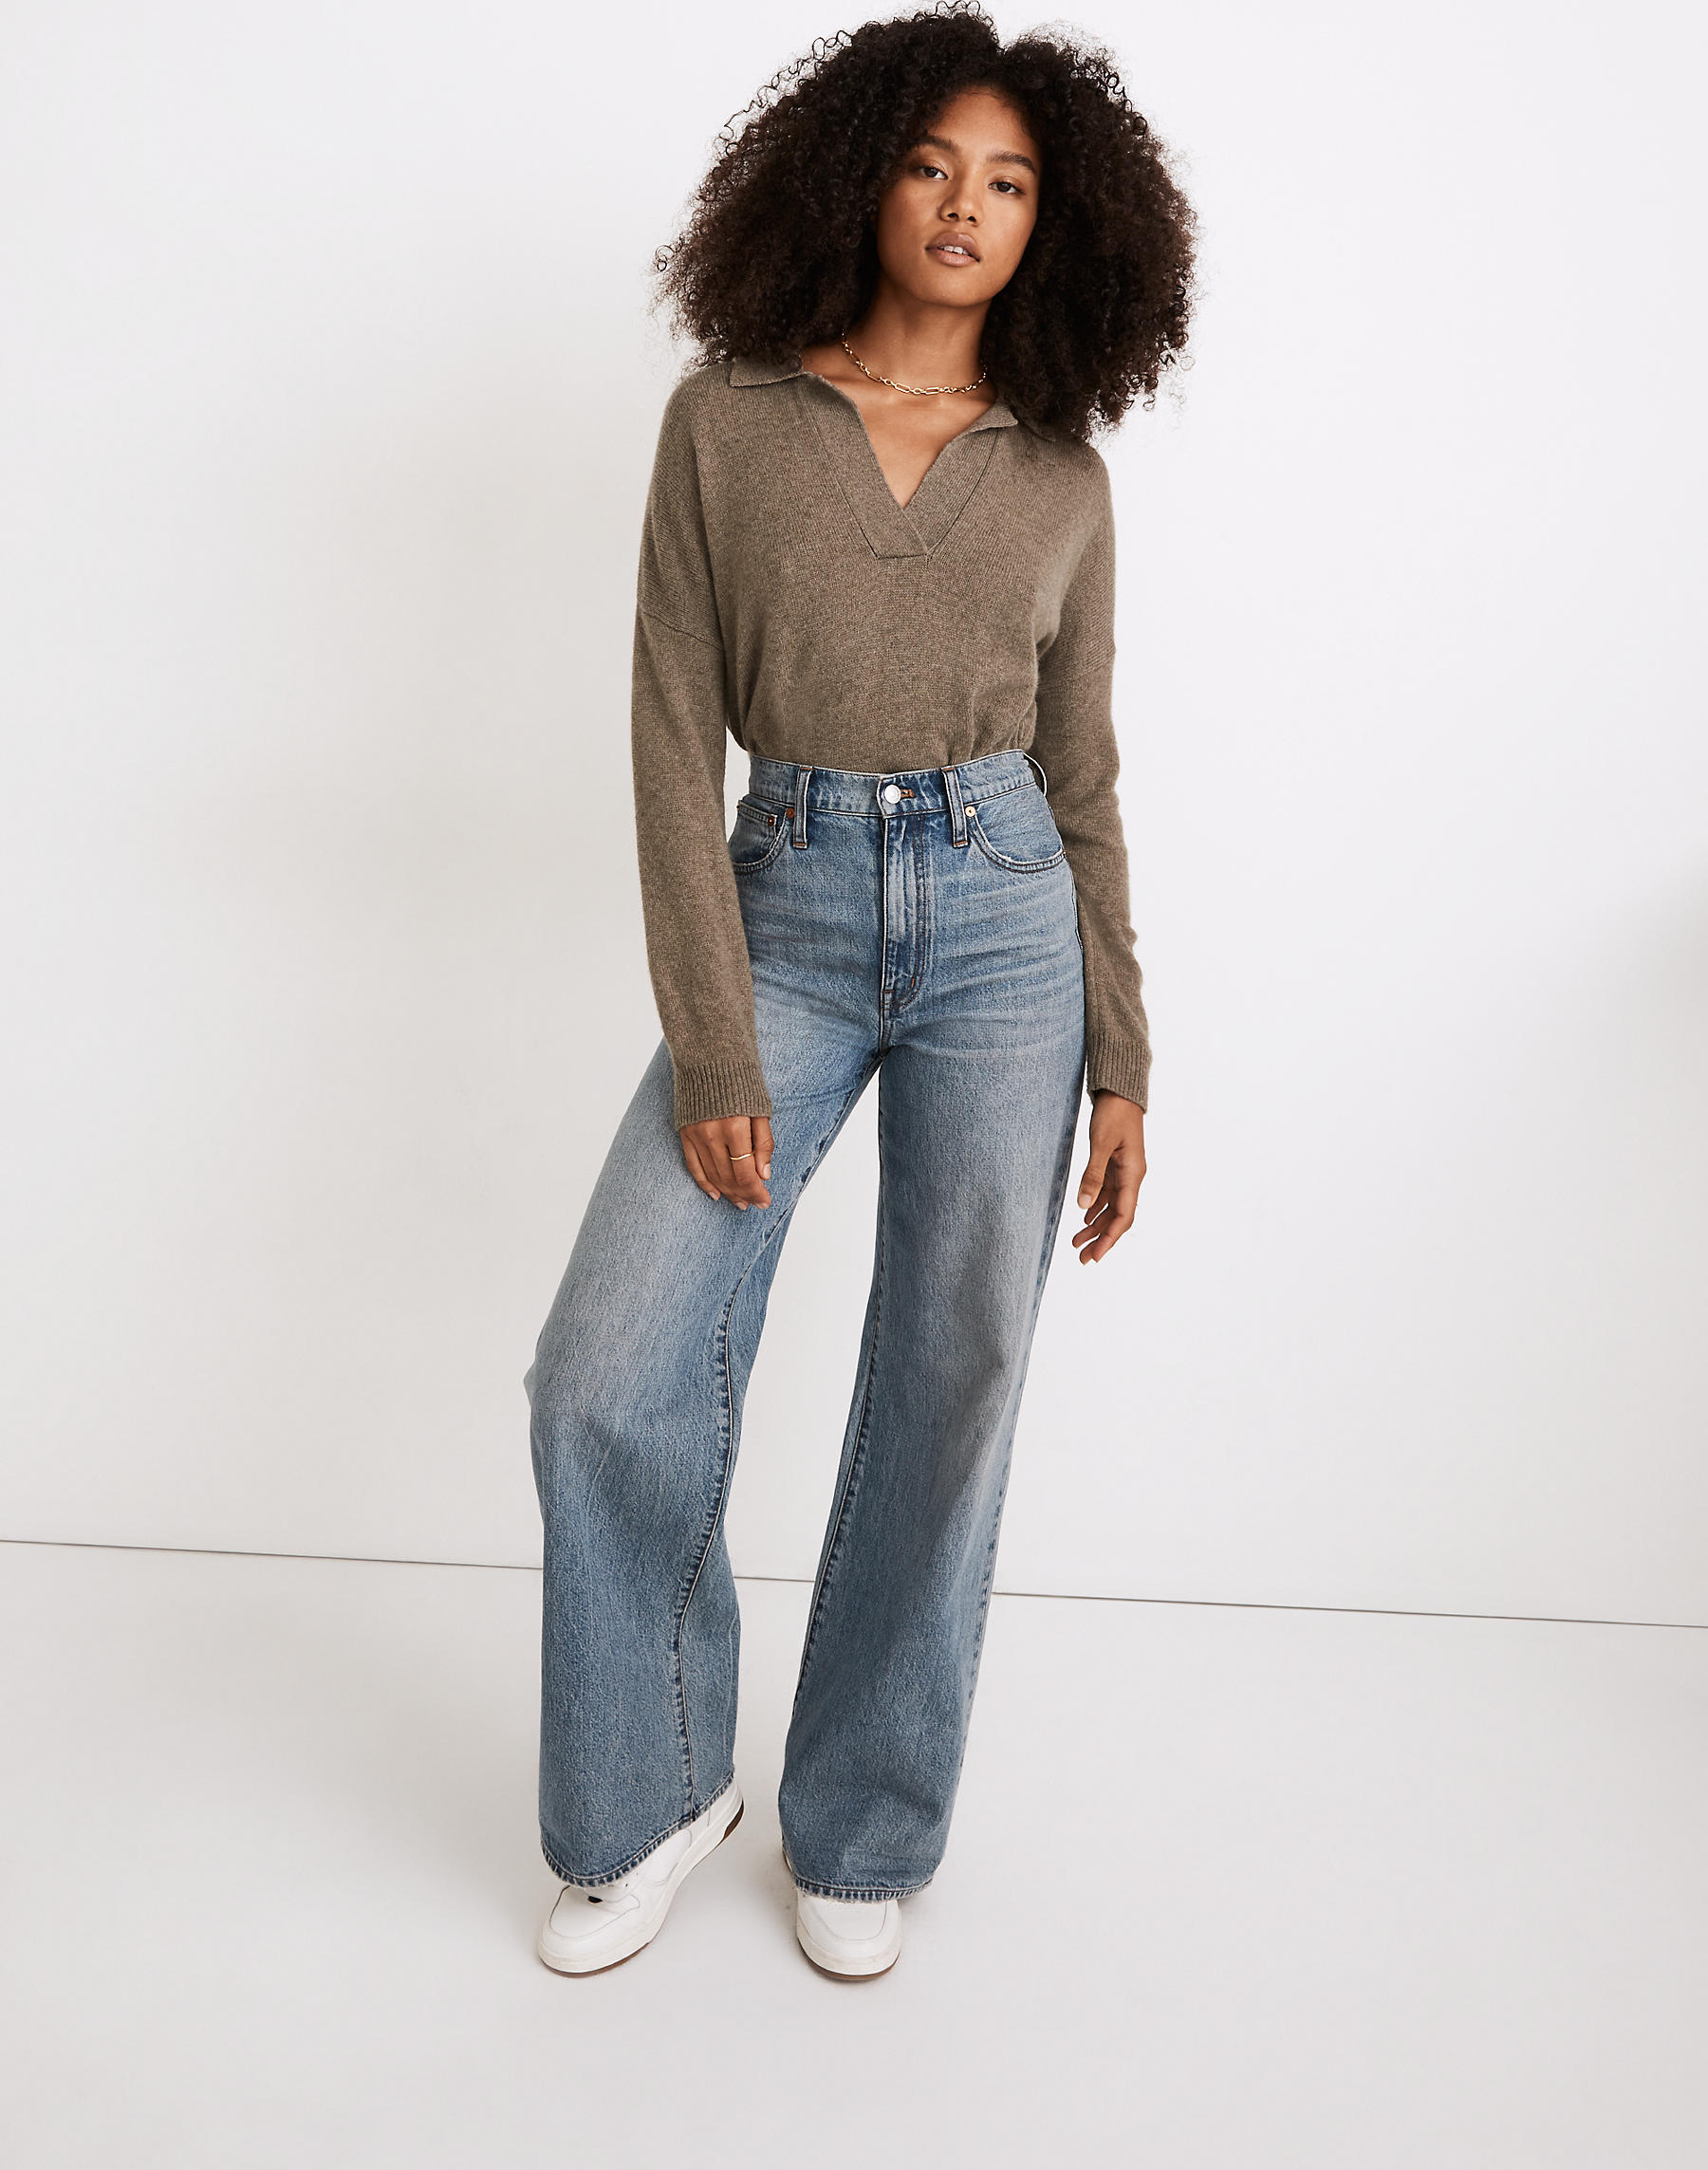 Denim jean trends 2022: High-waist, wide-leg and yes, skinny jeans ...